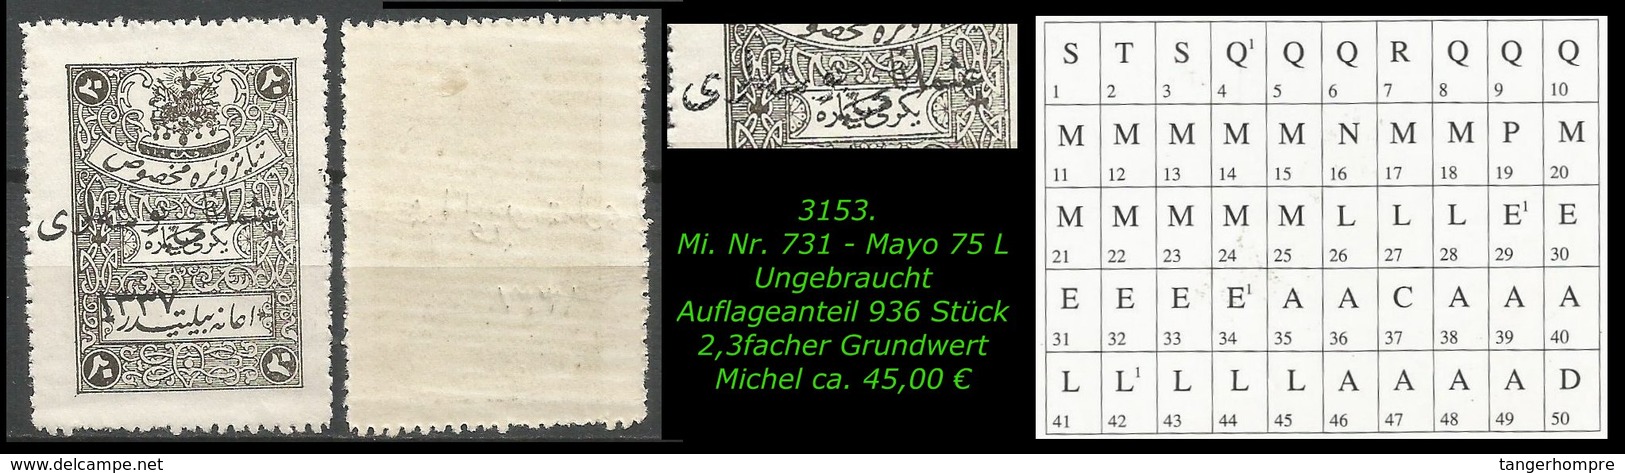 EARLY OTTOMAN SPECIALIZED FOR SPECIALIST, SEE...Mi. Nr. 731 - Mayo 75 L -R- In Ungebraucht - Ungebraucht